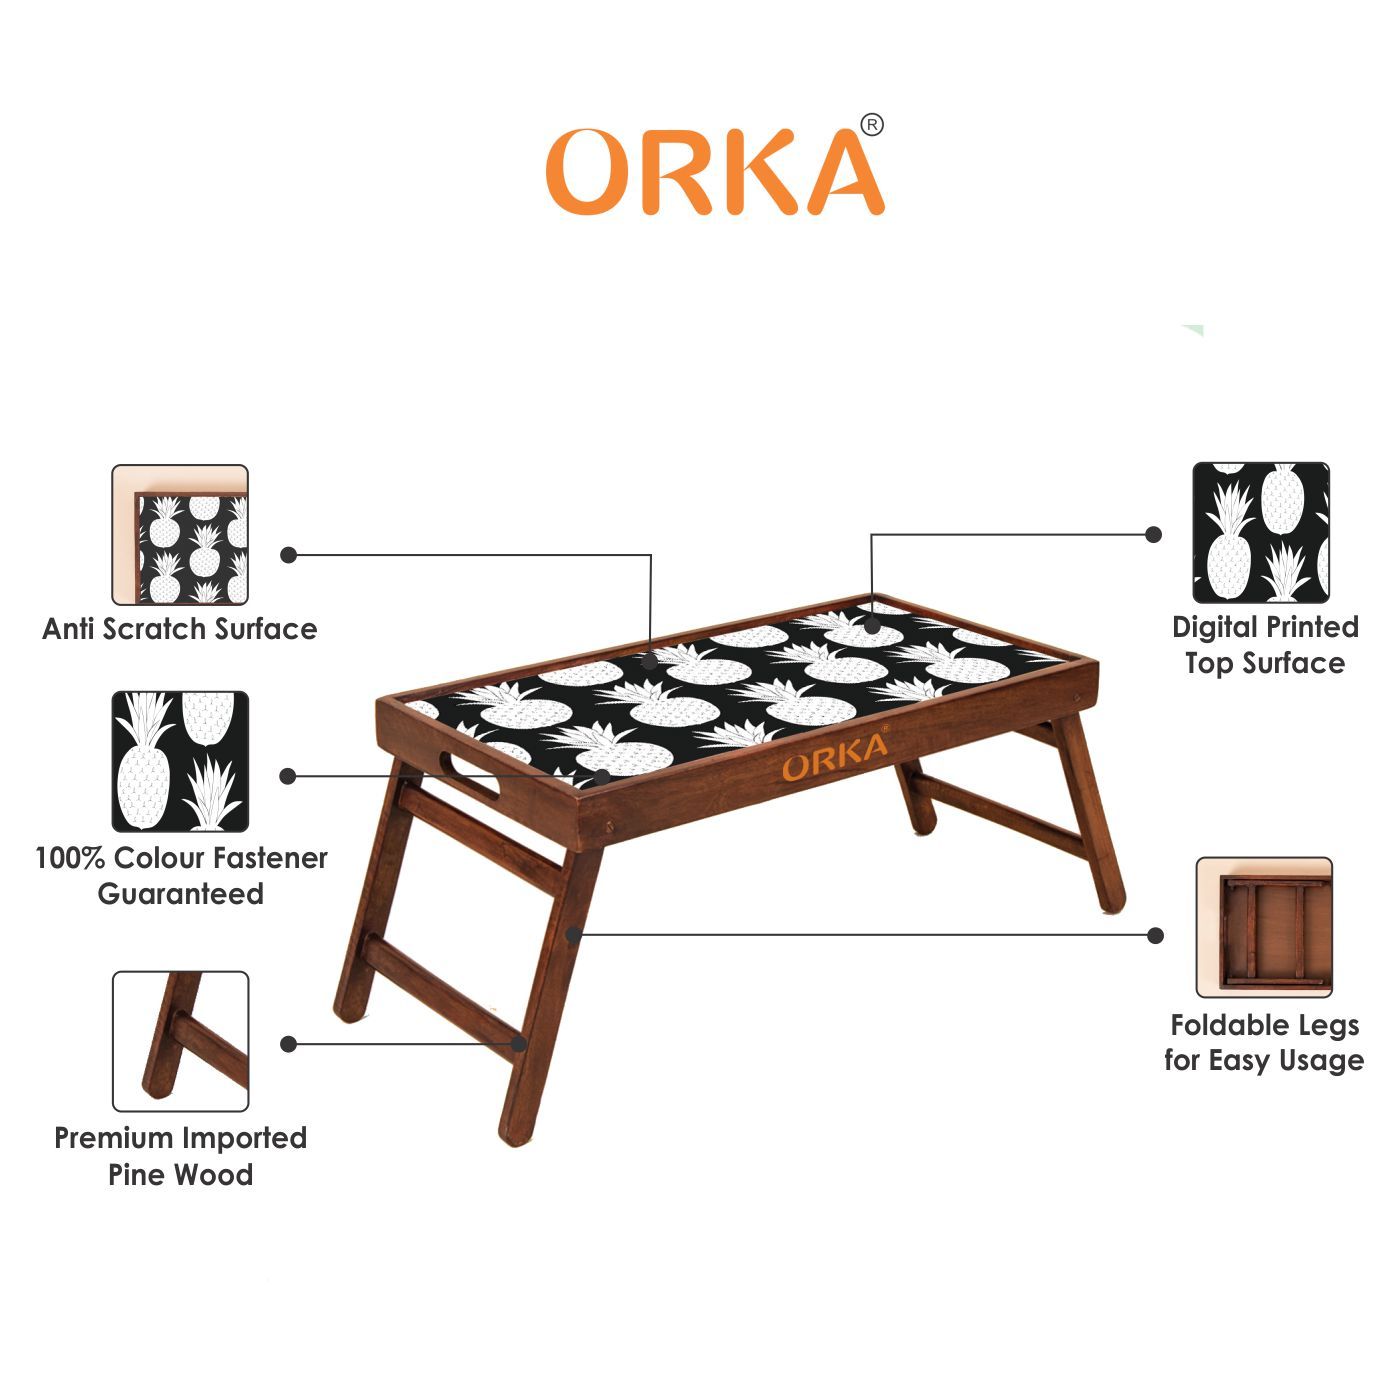 ORKA Spiny Apples Foldable Pine Wood Breakfast Table (Black, White)  